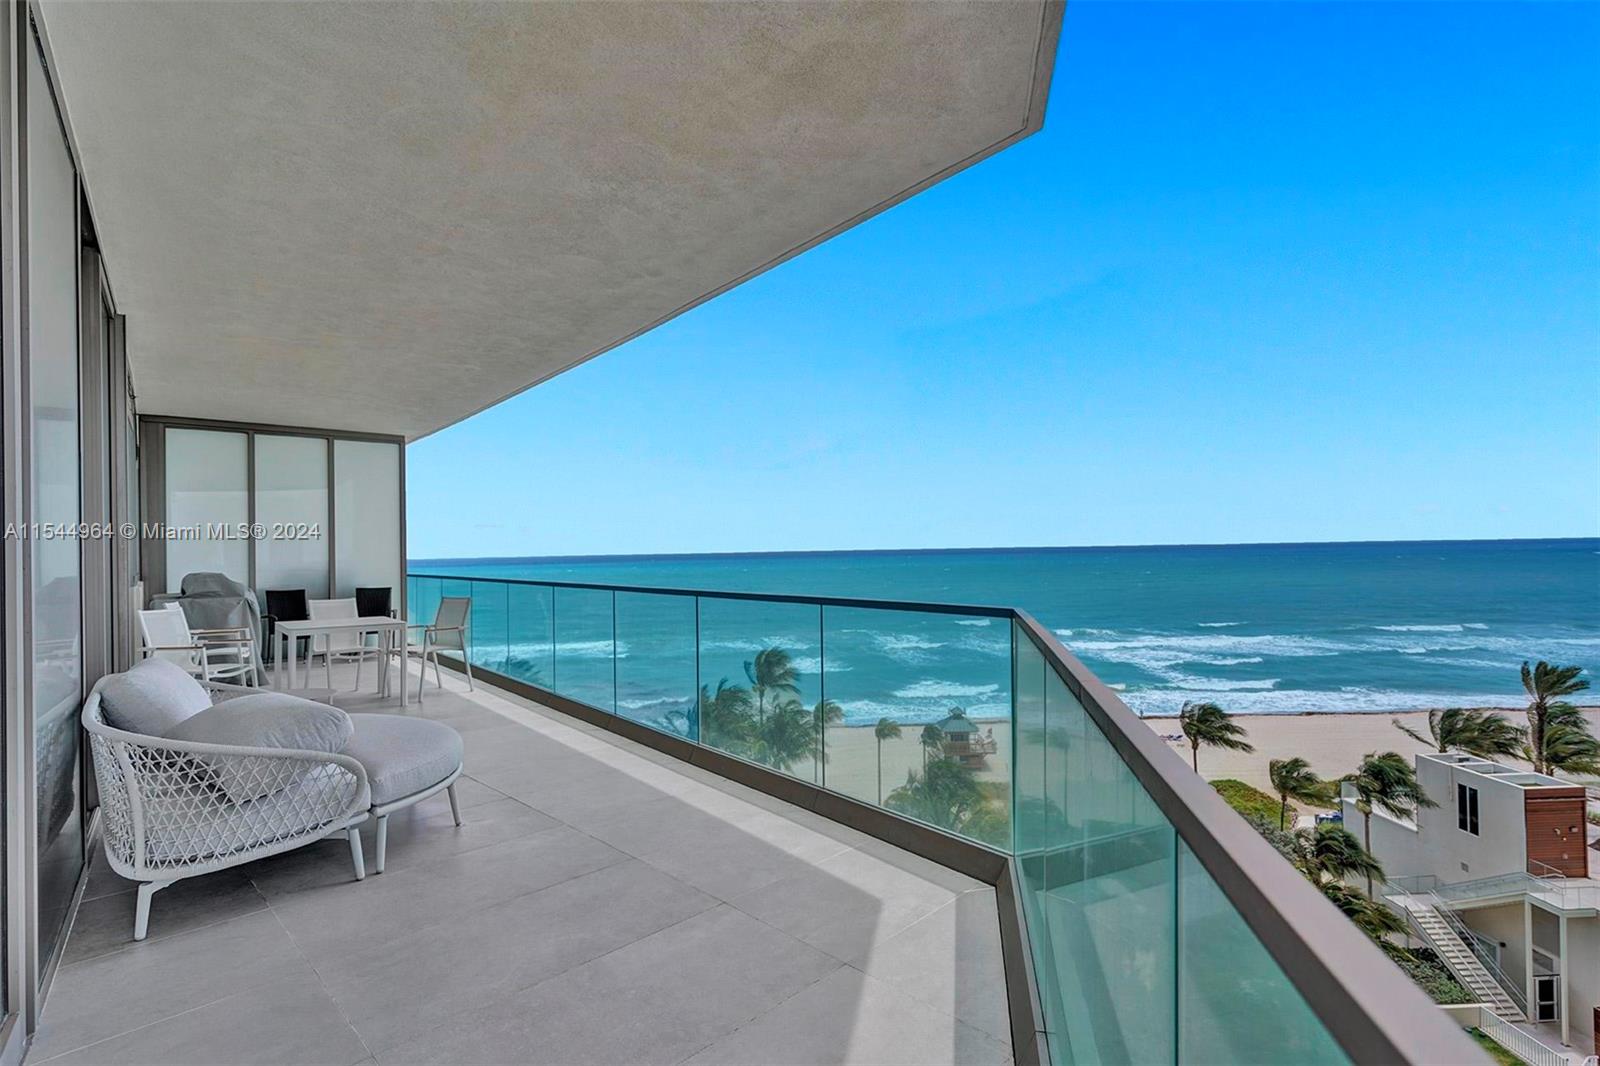 a balcony with view of ocean